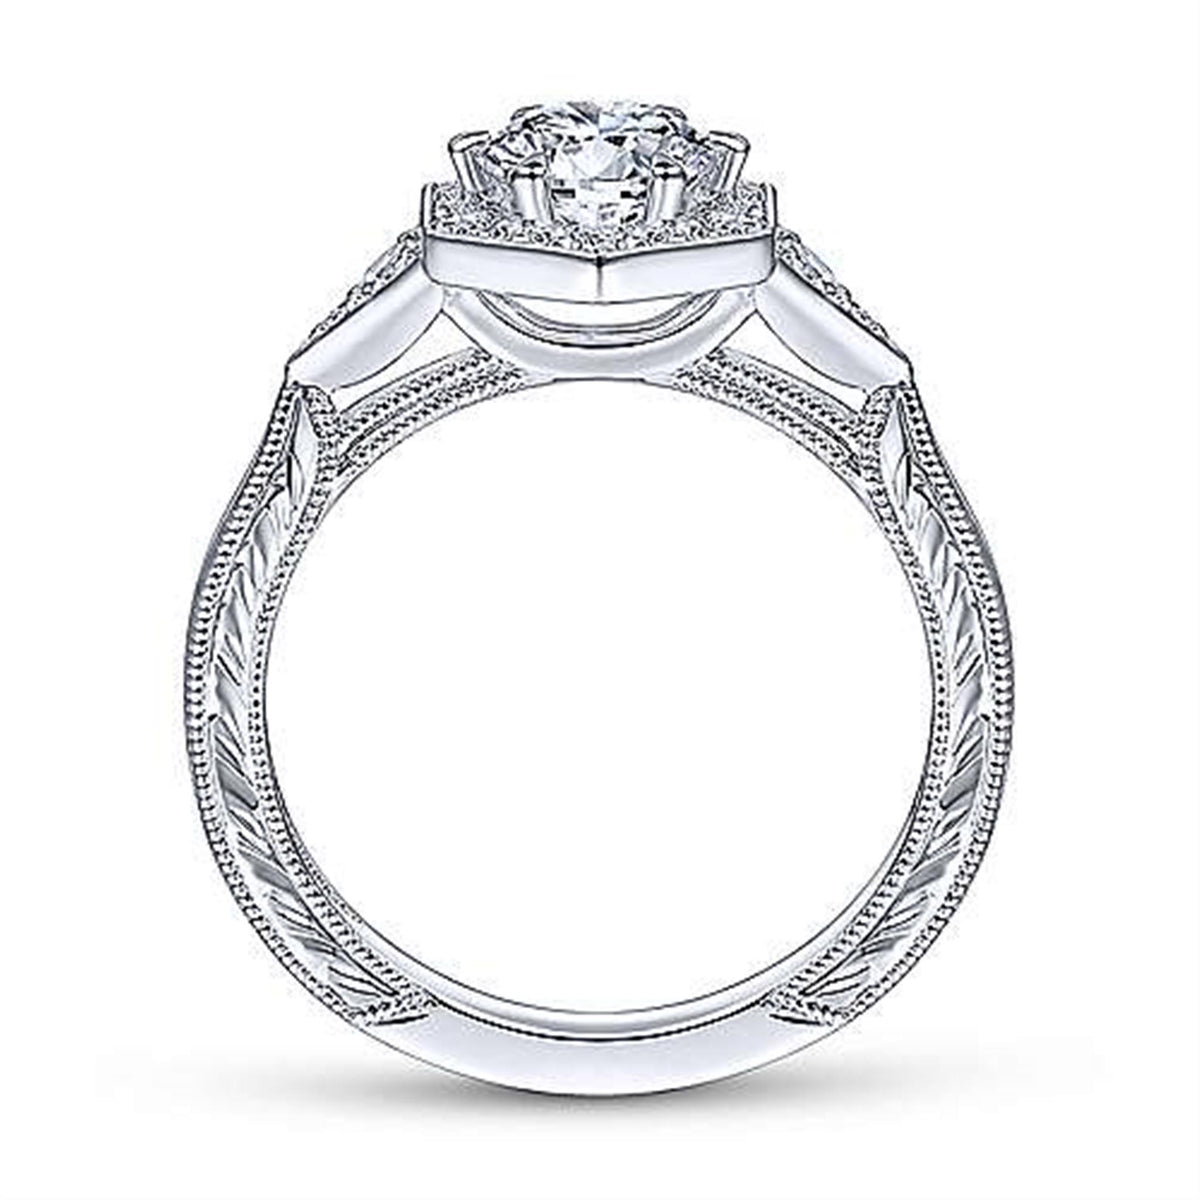 14Kt White Gold Vintage Inspired Engagement Ring With 0.70ct Natural Center Diamond